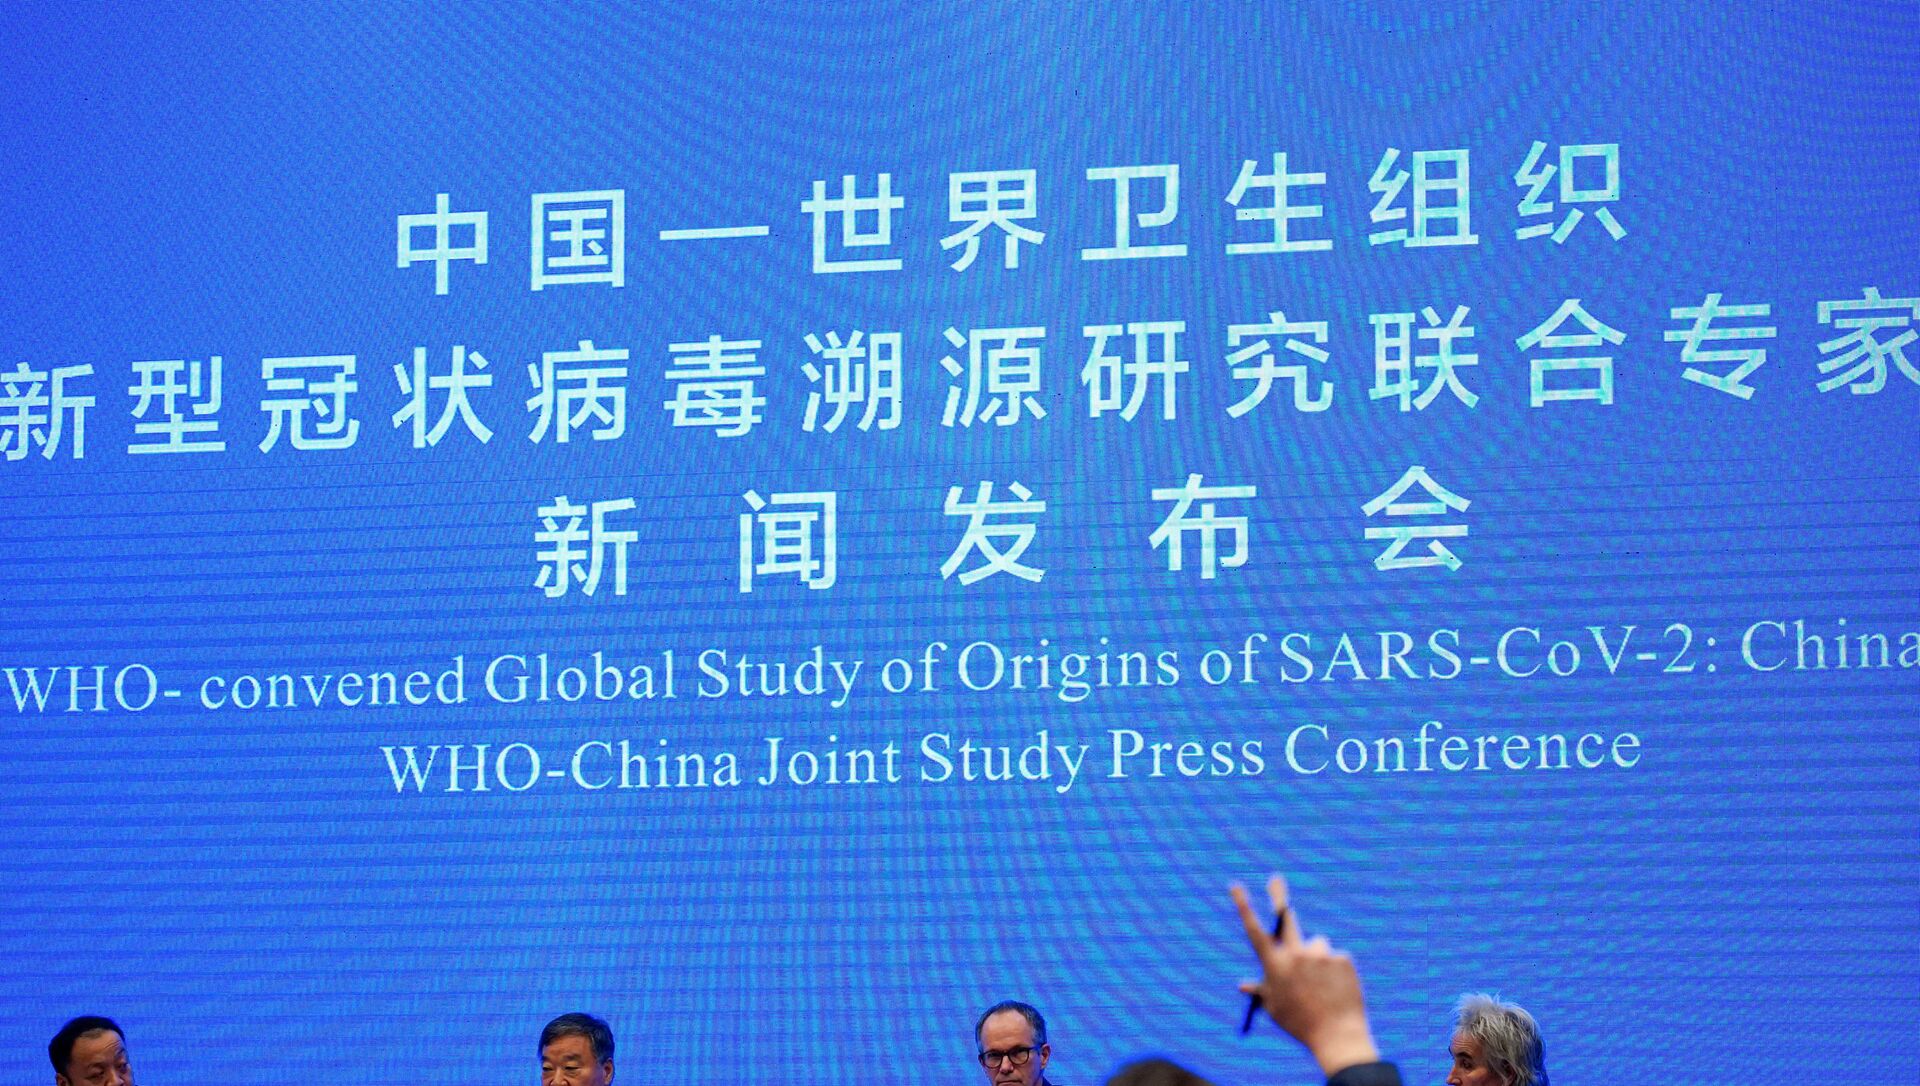 Peter Ben Embarek, a member of the World Health Organization (WHO) team tasked with investigating the origins of the coronavirus disease (COVID-19), attends the WHO-China joint study news conference at a hotel in Wuhan, Hubei province, China February 9, 2021.  - Sputnik International, 1920, 25.08.2021